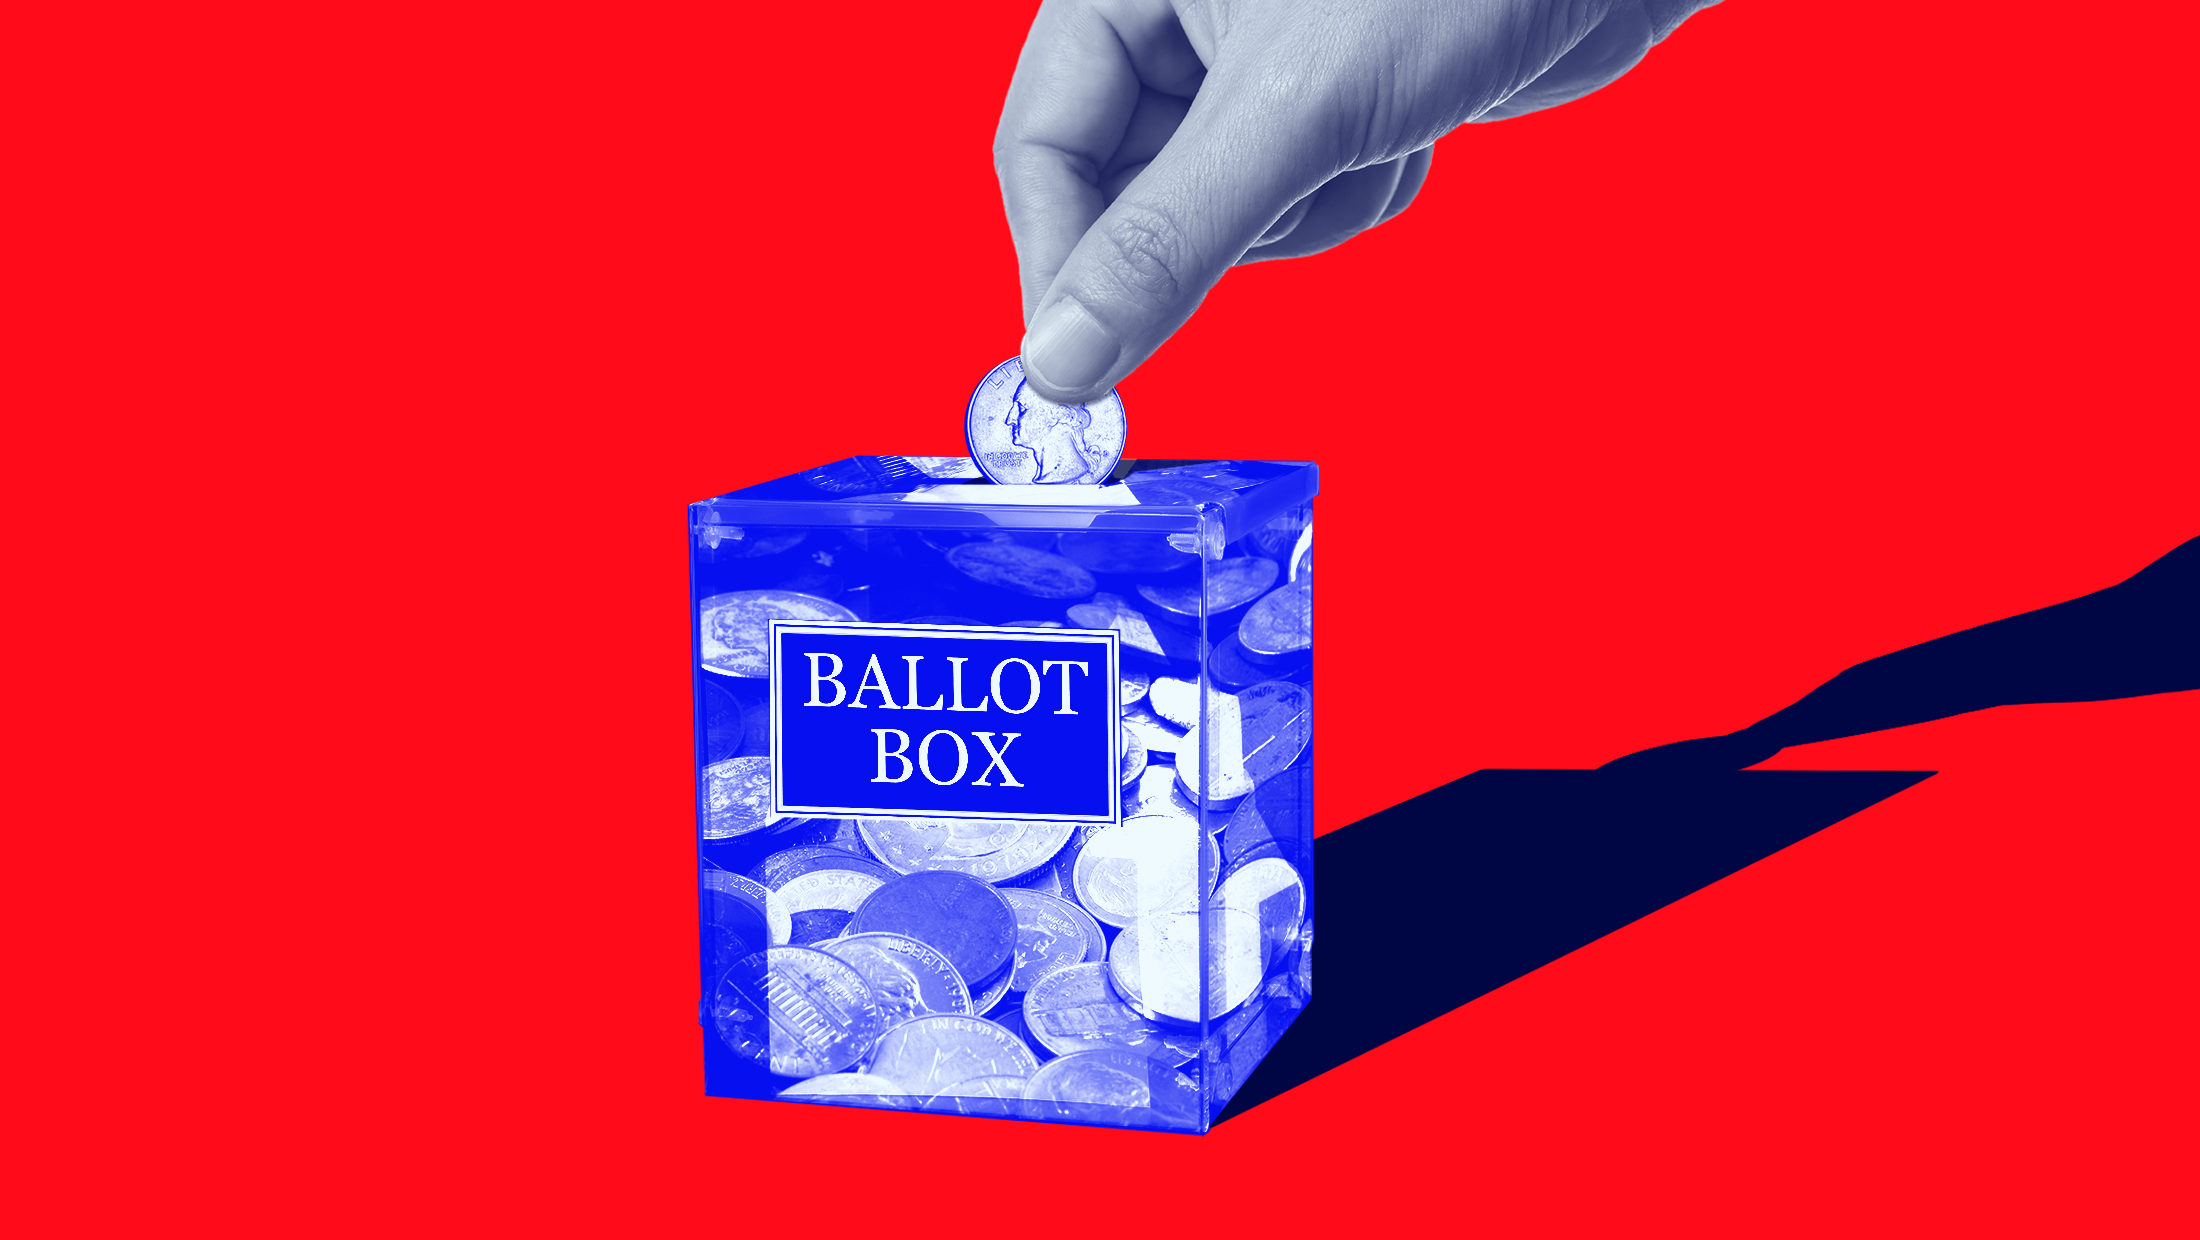 Red background with coin box that says "Ballot Box" on it and someone putting a coin into the box.